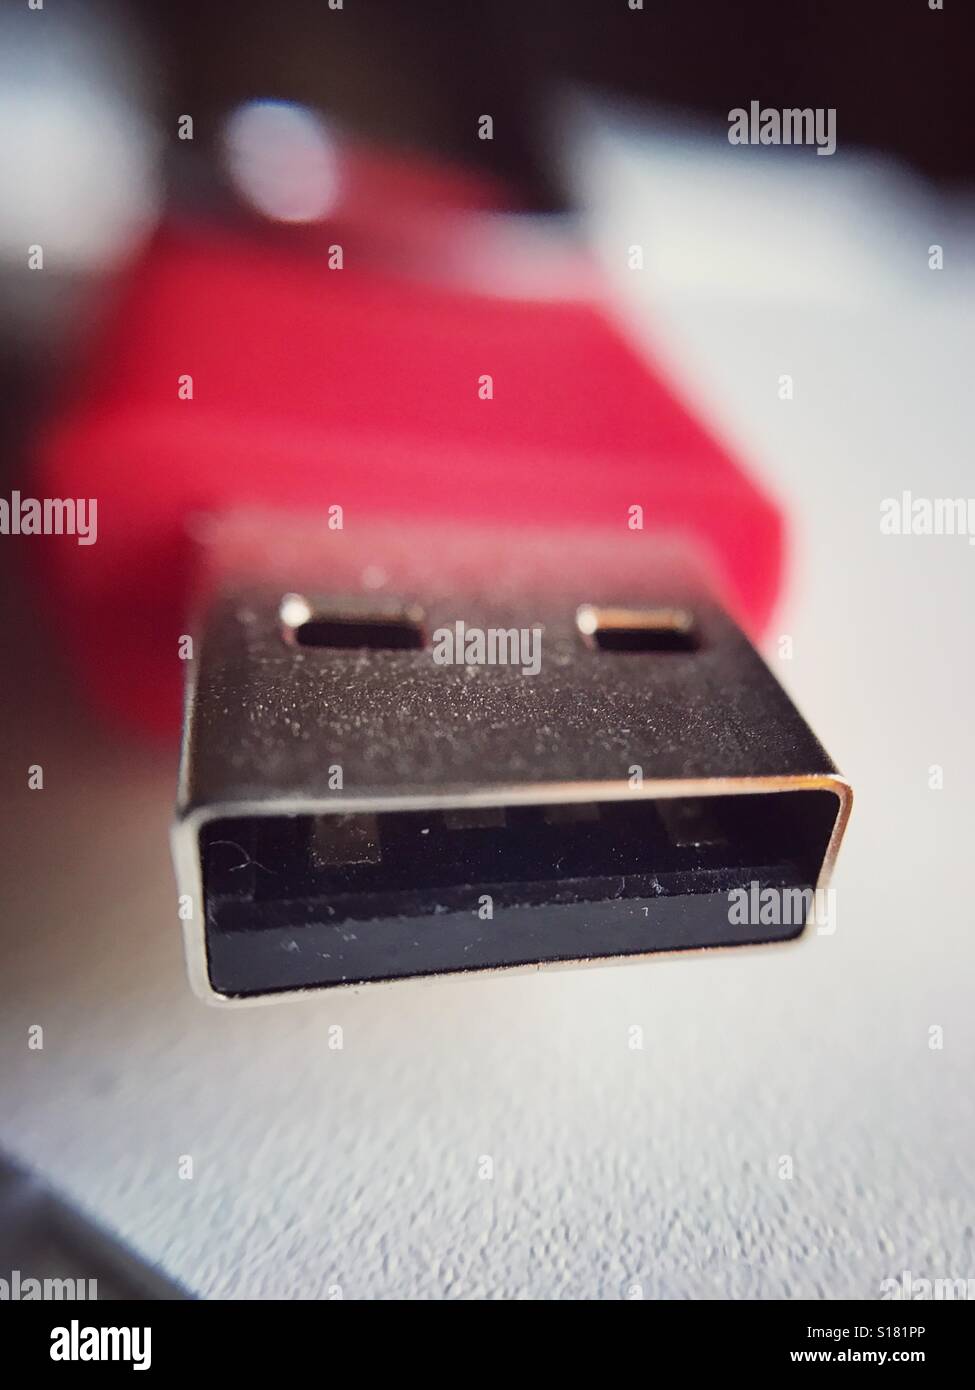 USB connection for a thumb drive Stock Photo